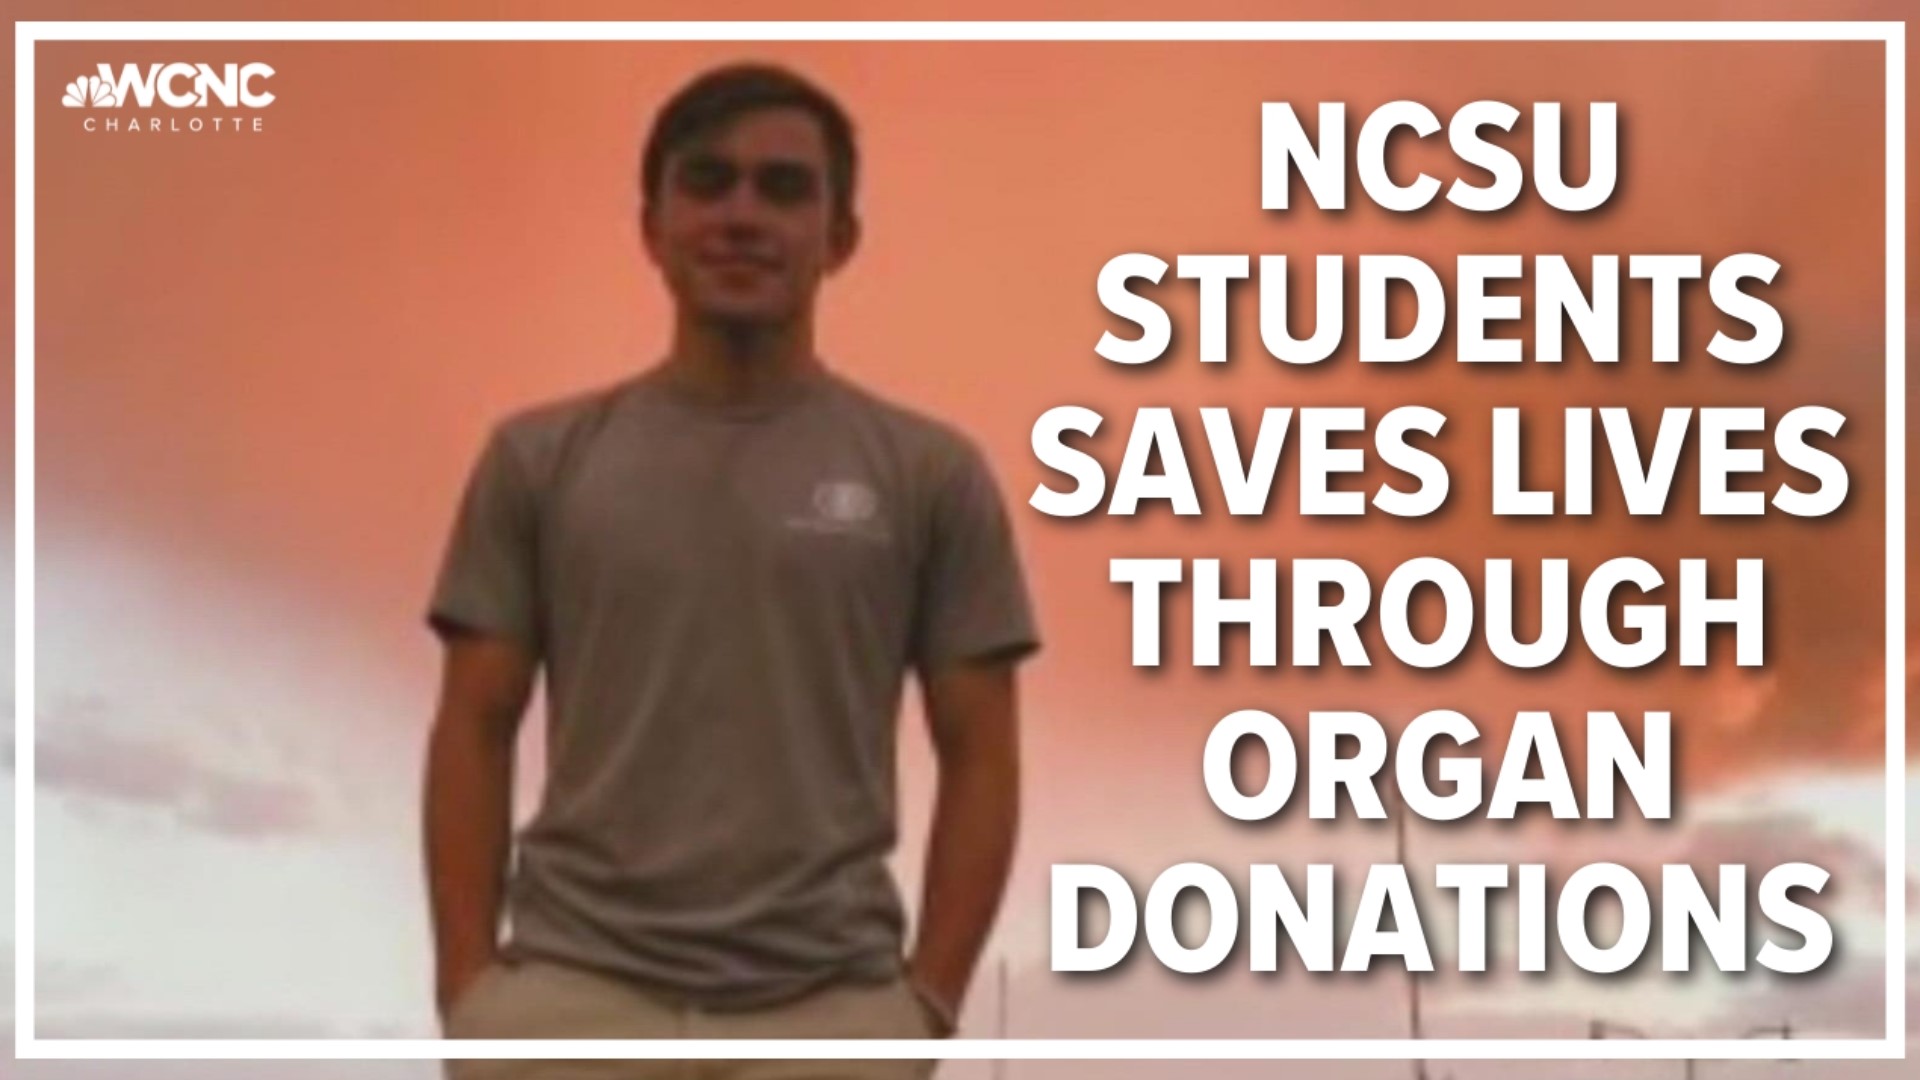 When an NCSU student was killed last year, his organs were donated to five people.